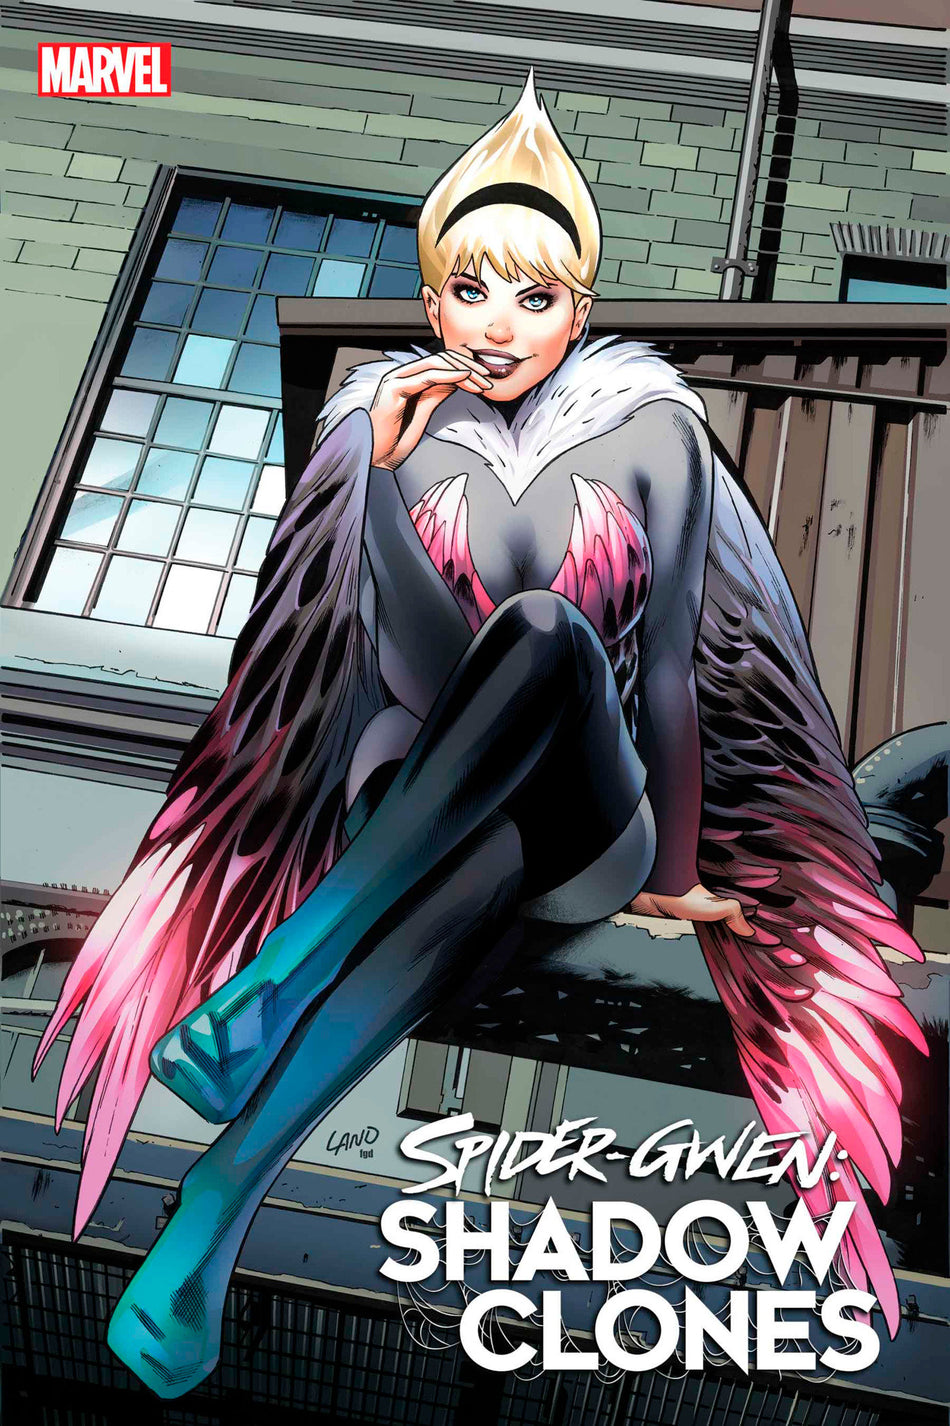 Stock Photo of Spider-Gwen: Shadow Clones 5 Greg Land Variant comic sold by Stronghold Collectibles